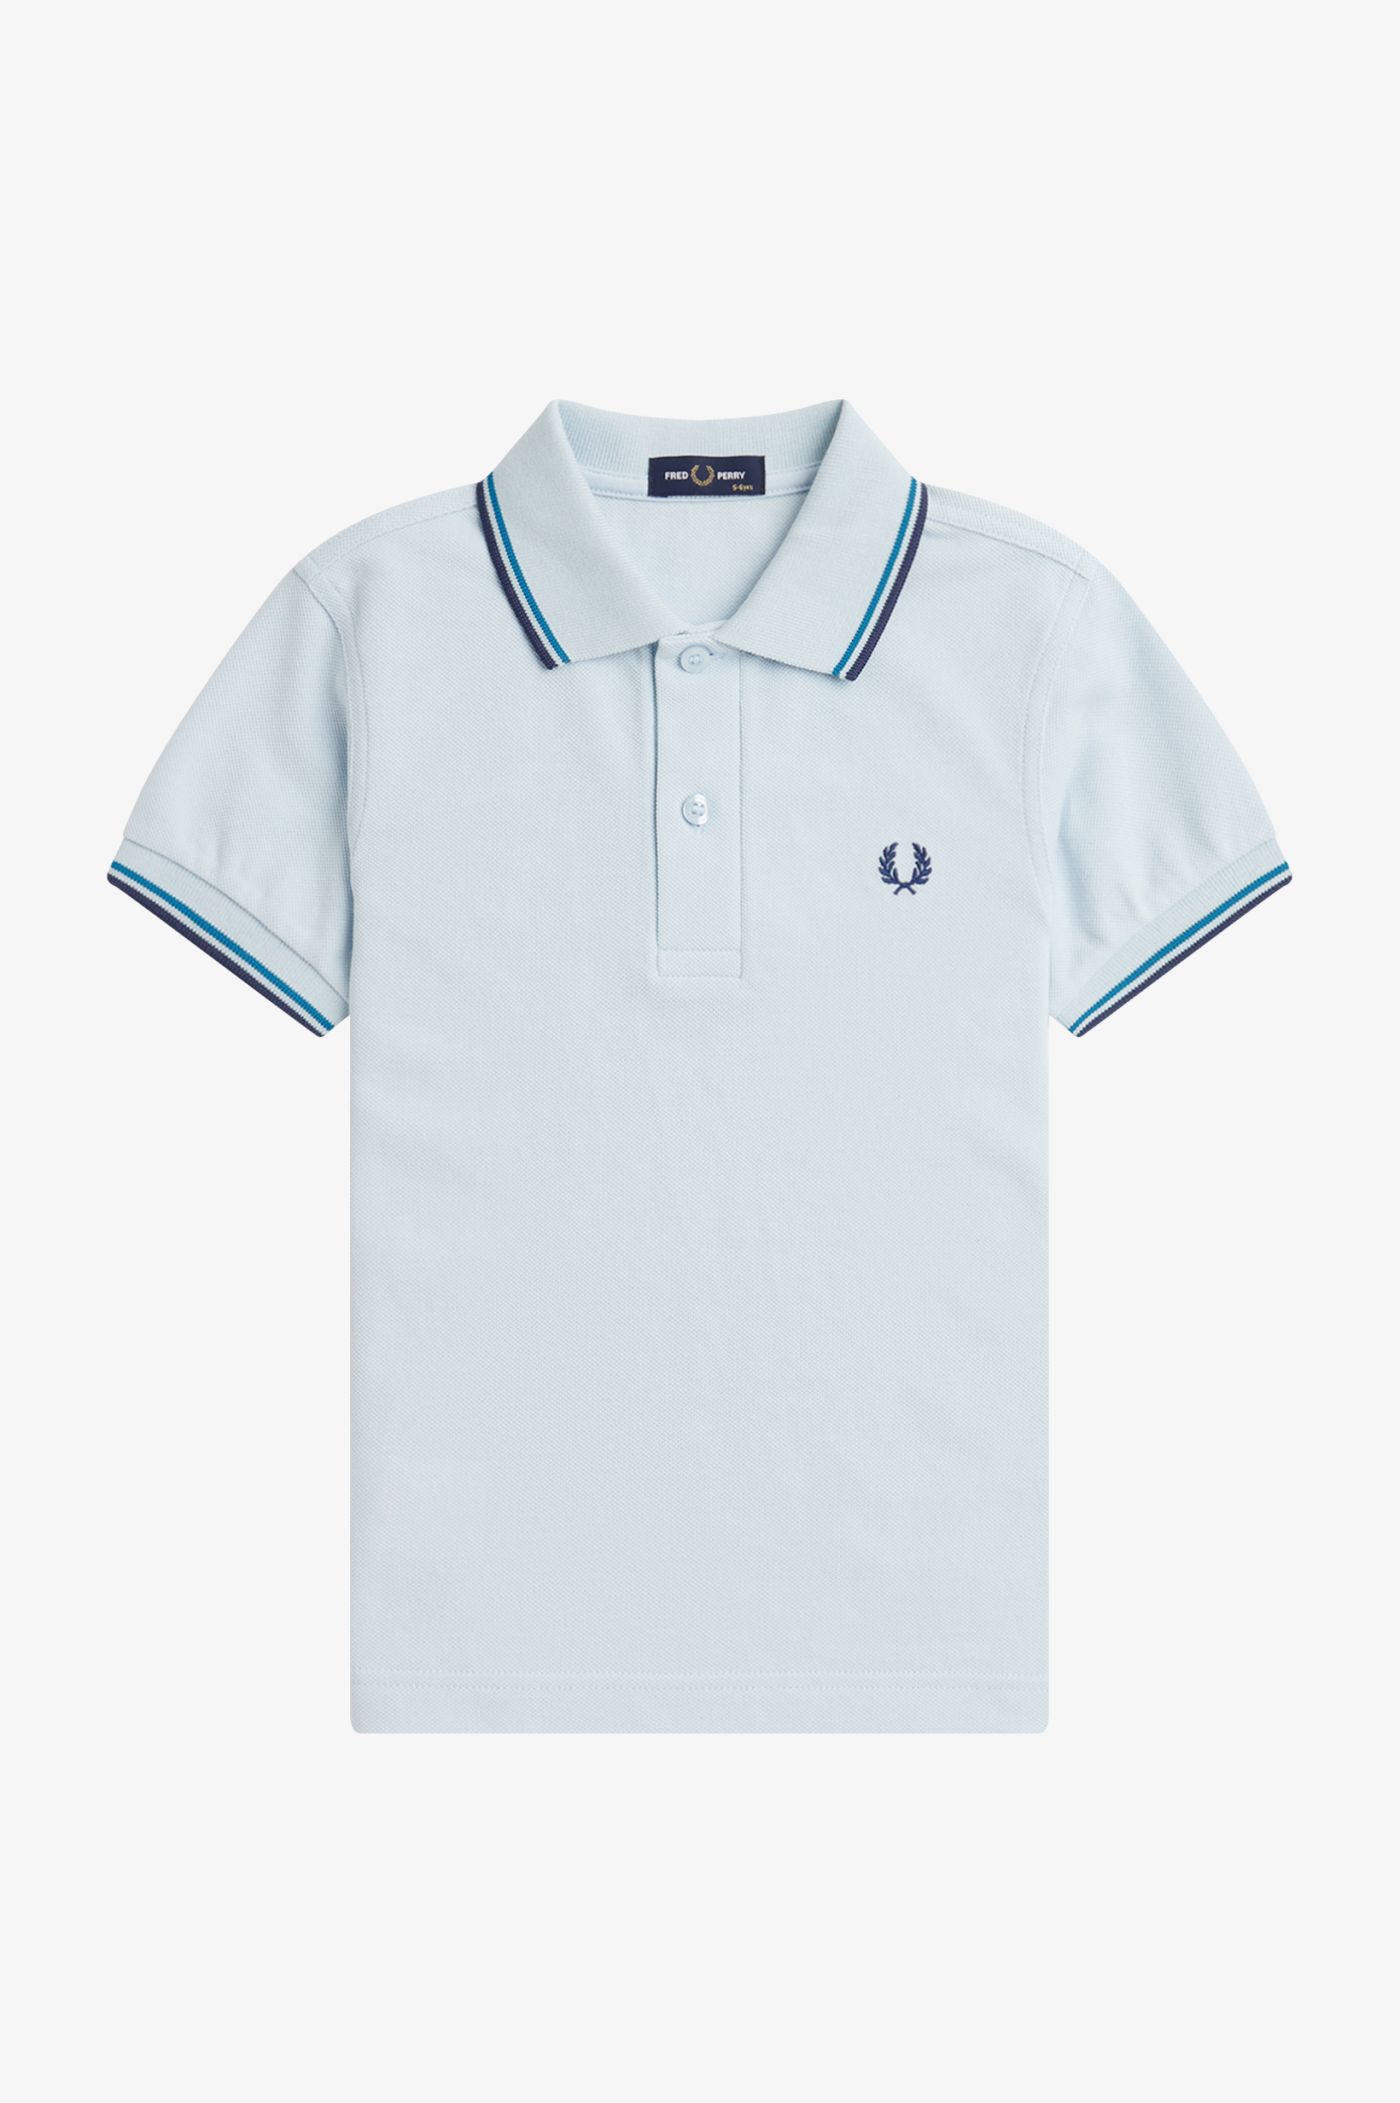 Kids Twin Tipped Fred Perry Shirt - Light Ice / Cyber Blue / Midnight Blue  | Kids | Children\'s Polo Shirts & Kids Designer Clothes | Fred Perry US | T-Shirts